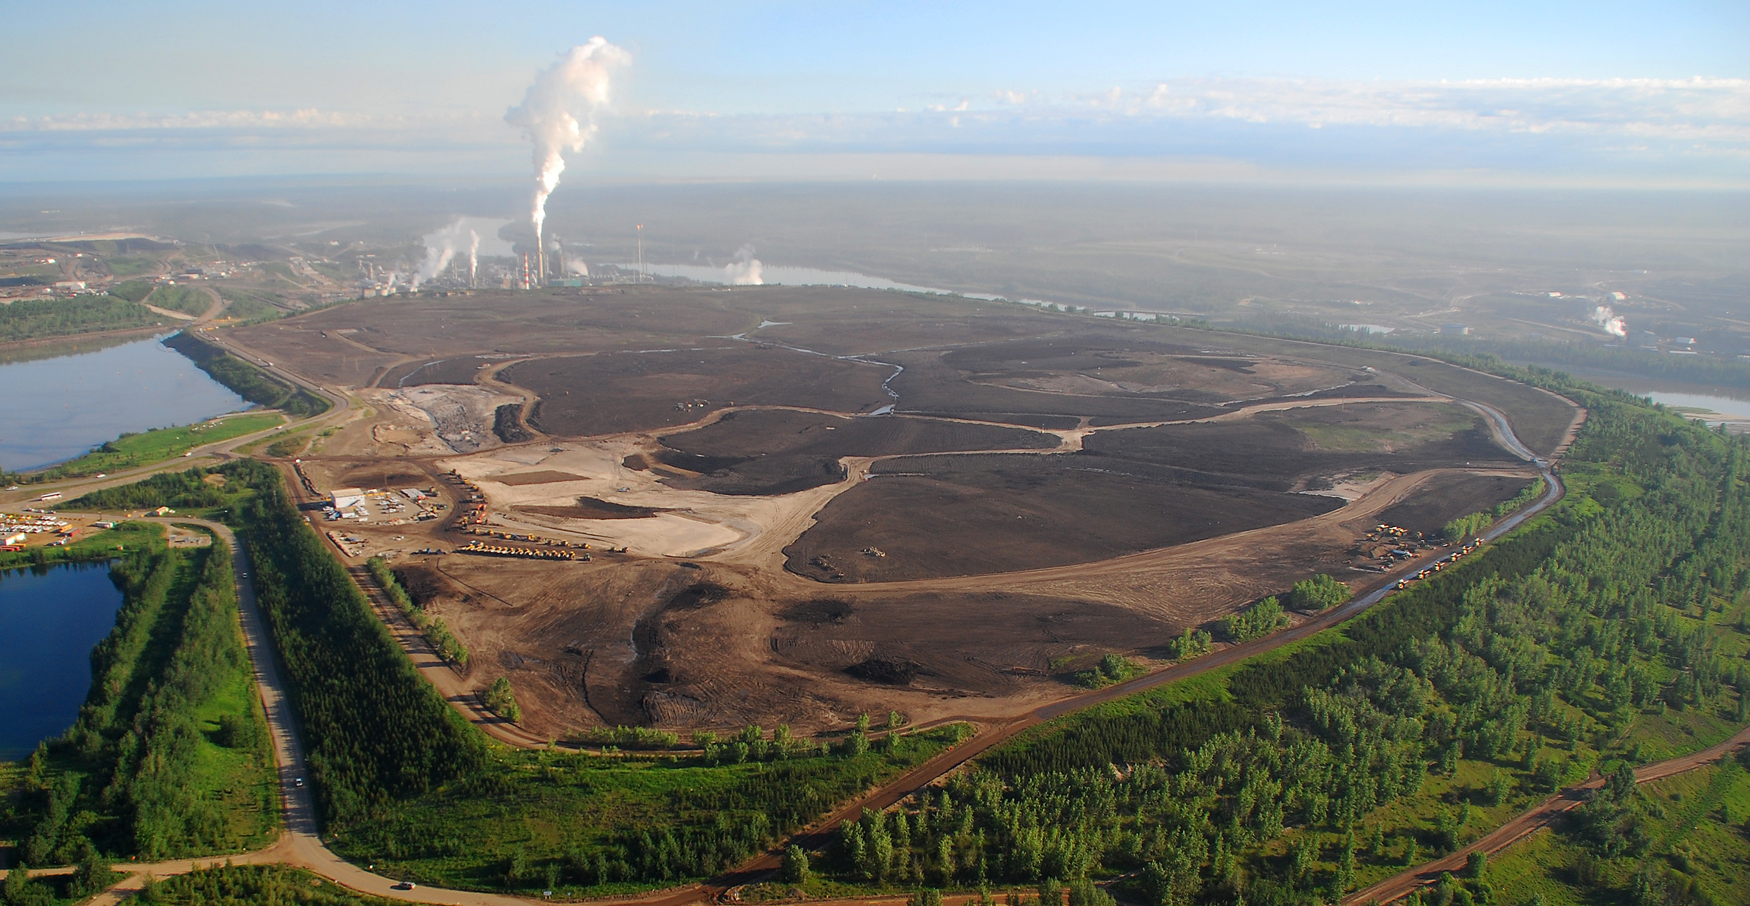 aerial view of oilsands reclamation site